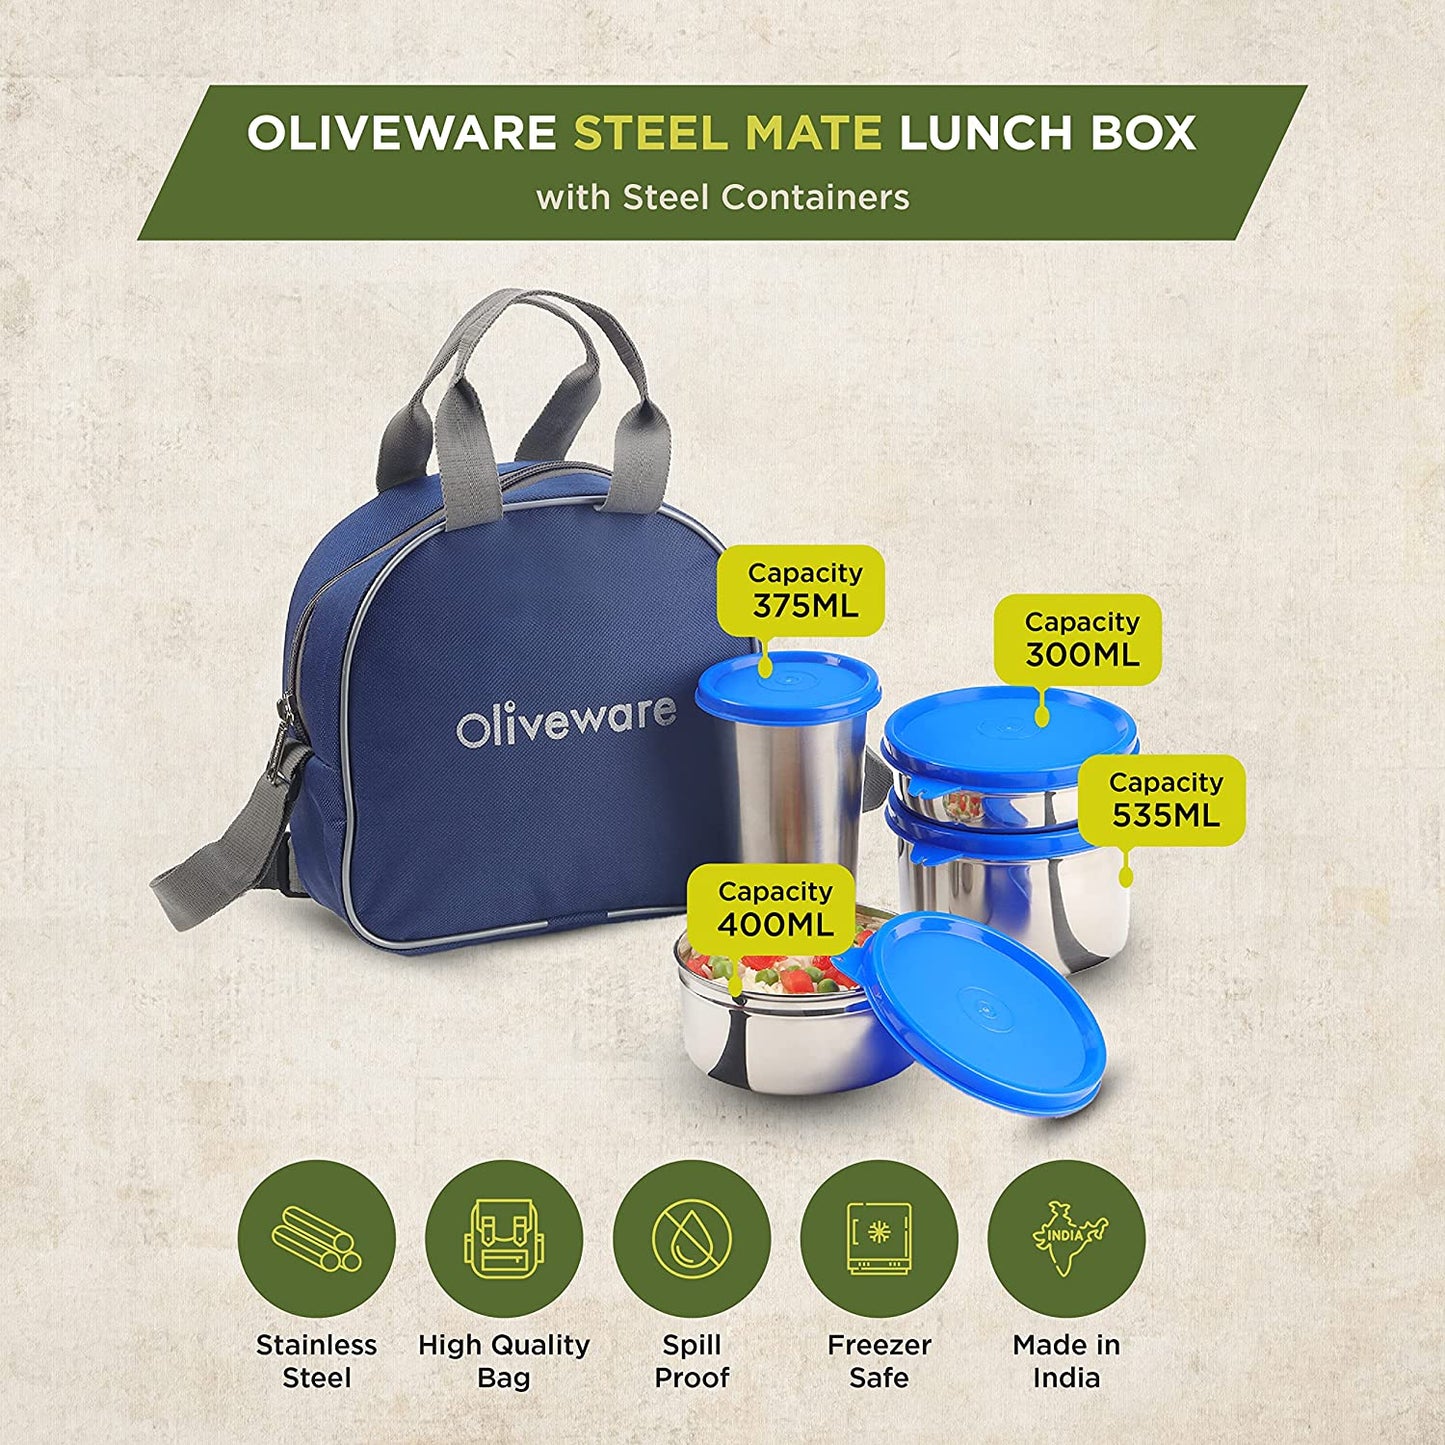 Steel Mate Lunch Box